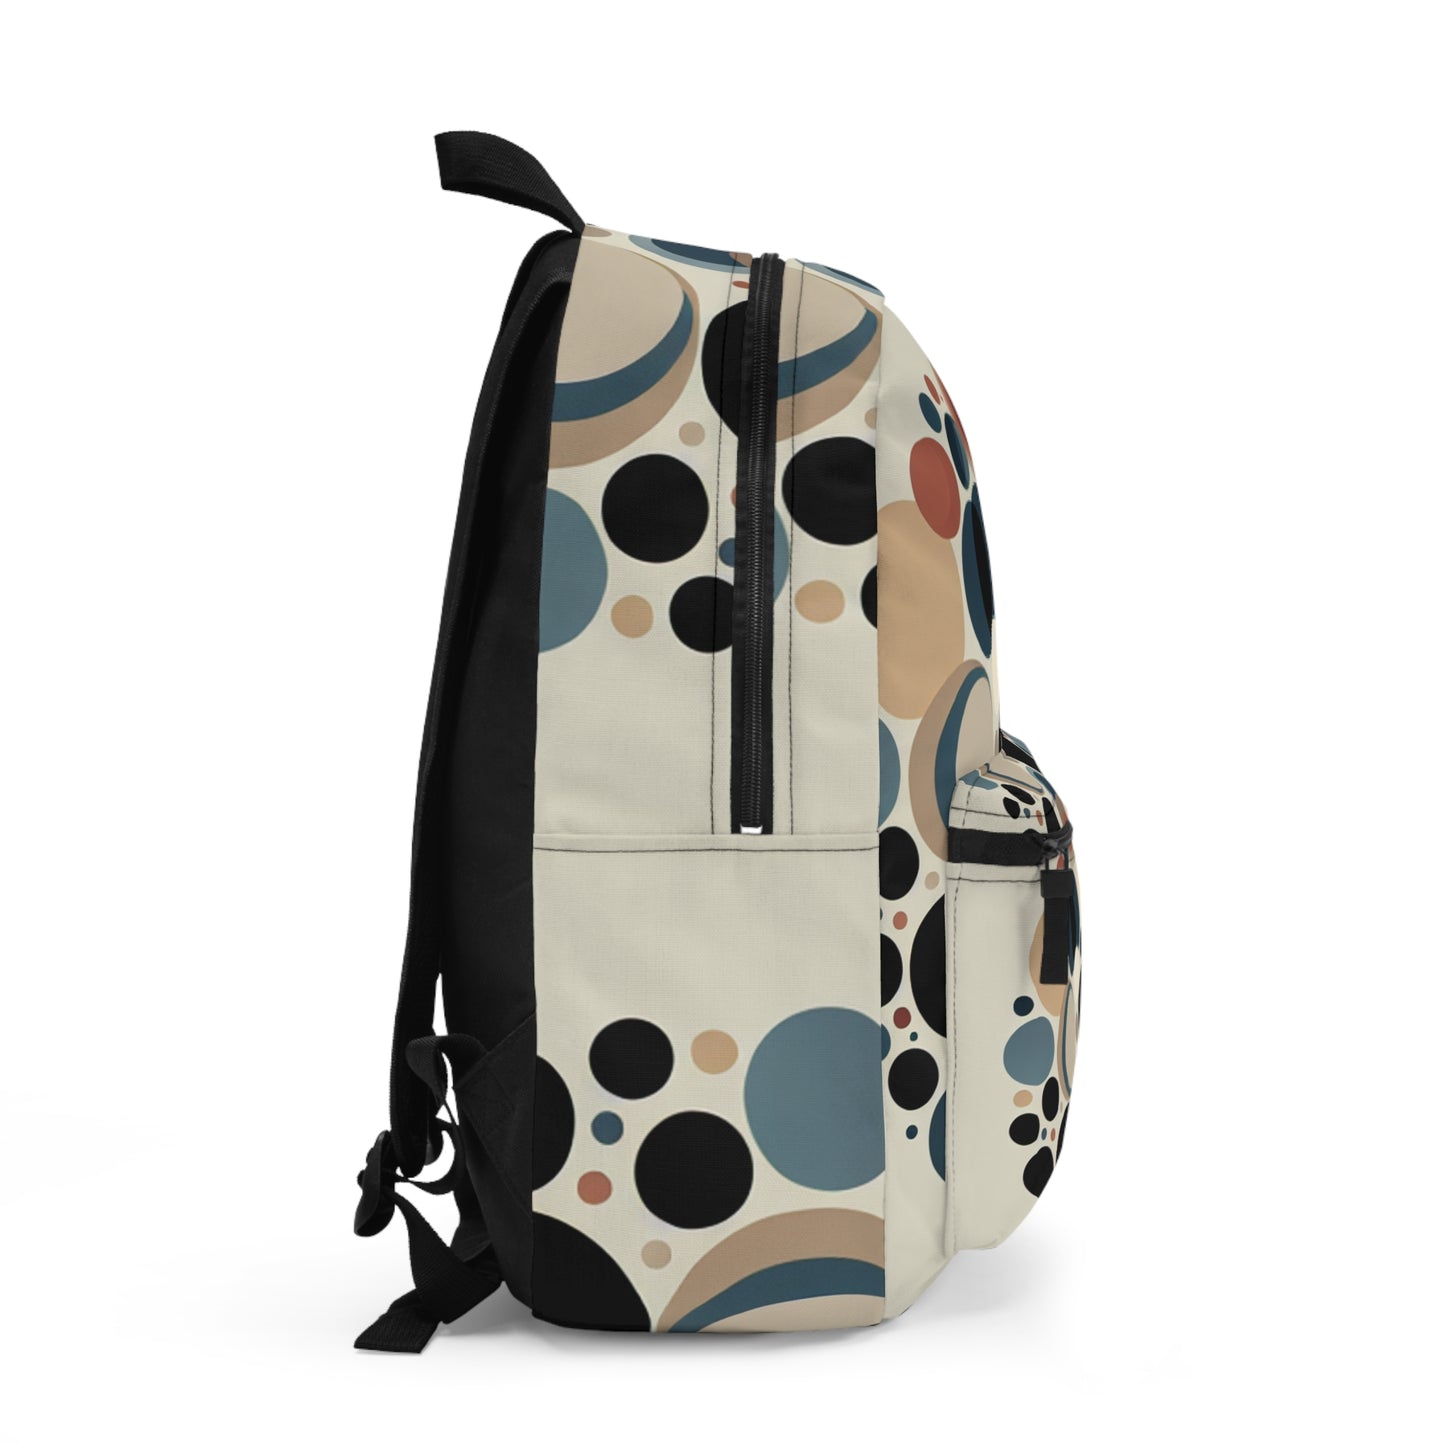 "Interwoven Circles: A Minimalist Approach" - The Alien Backpack Minimalism Style